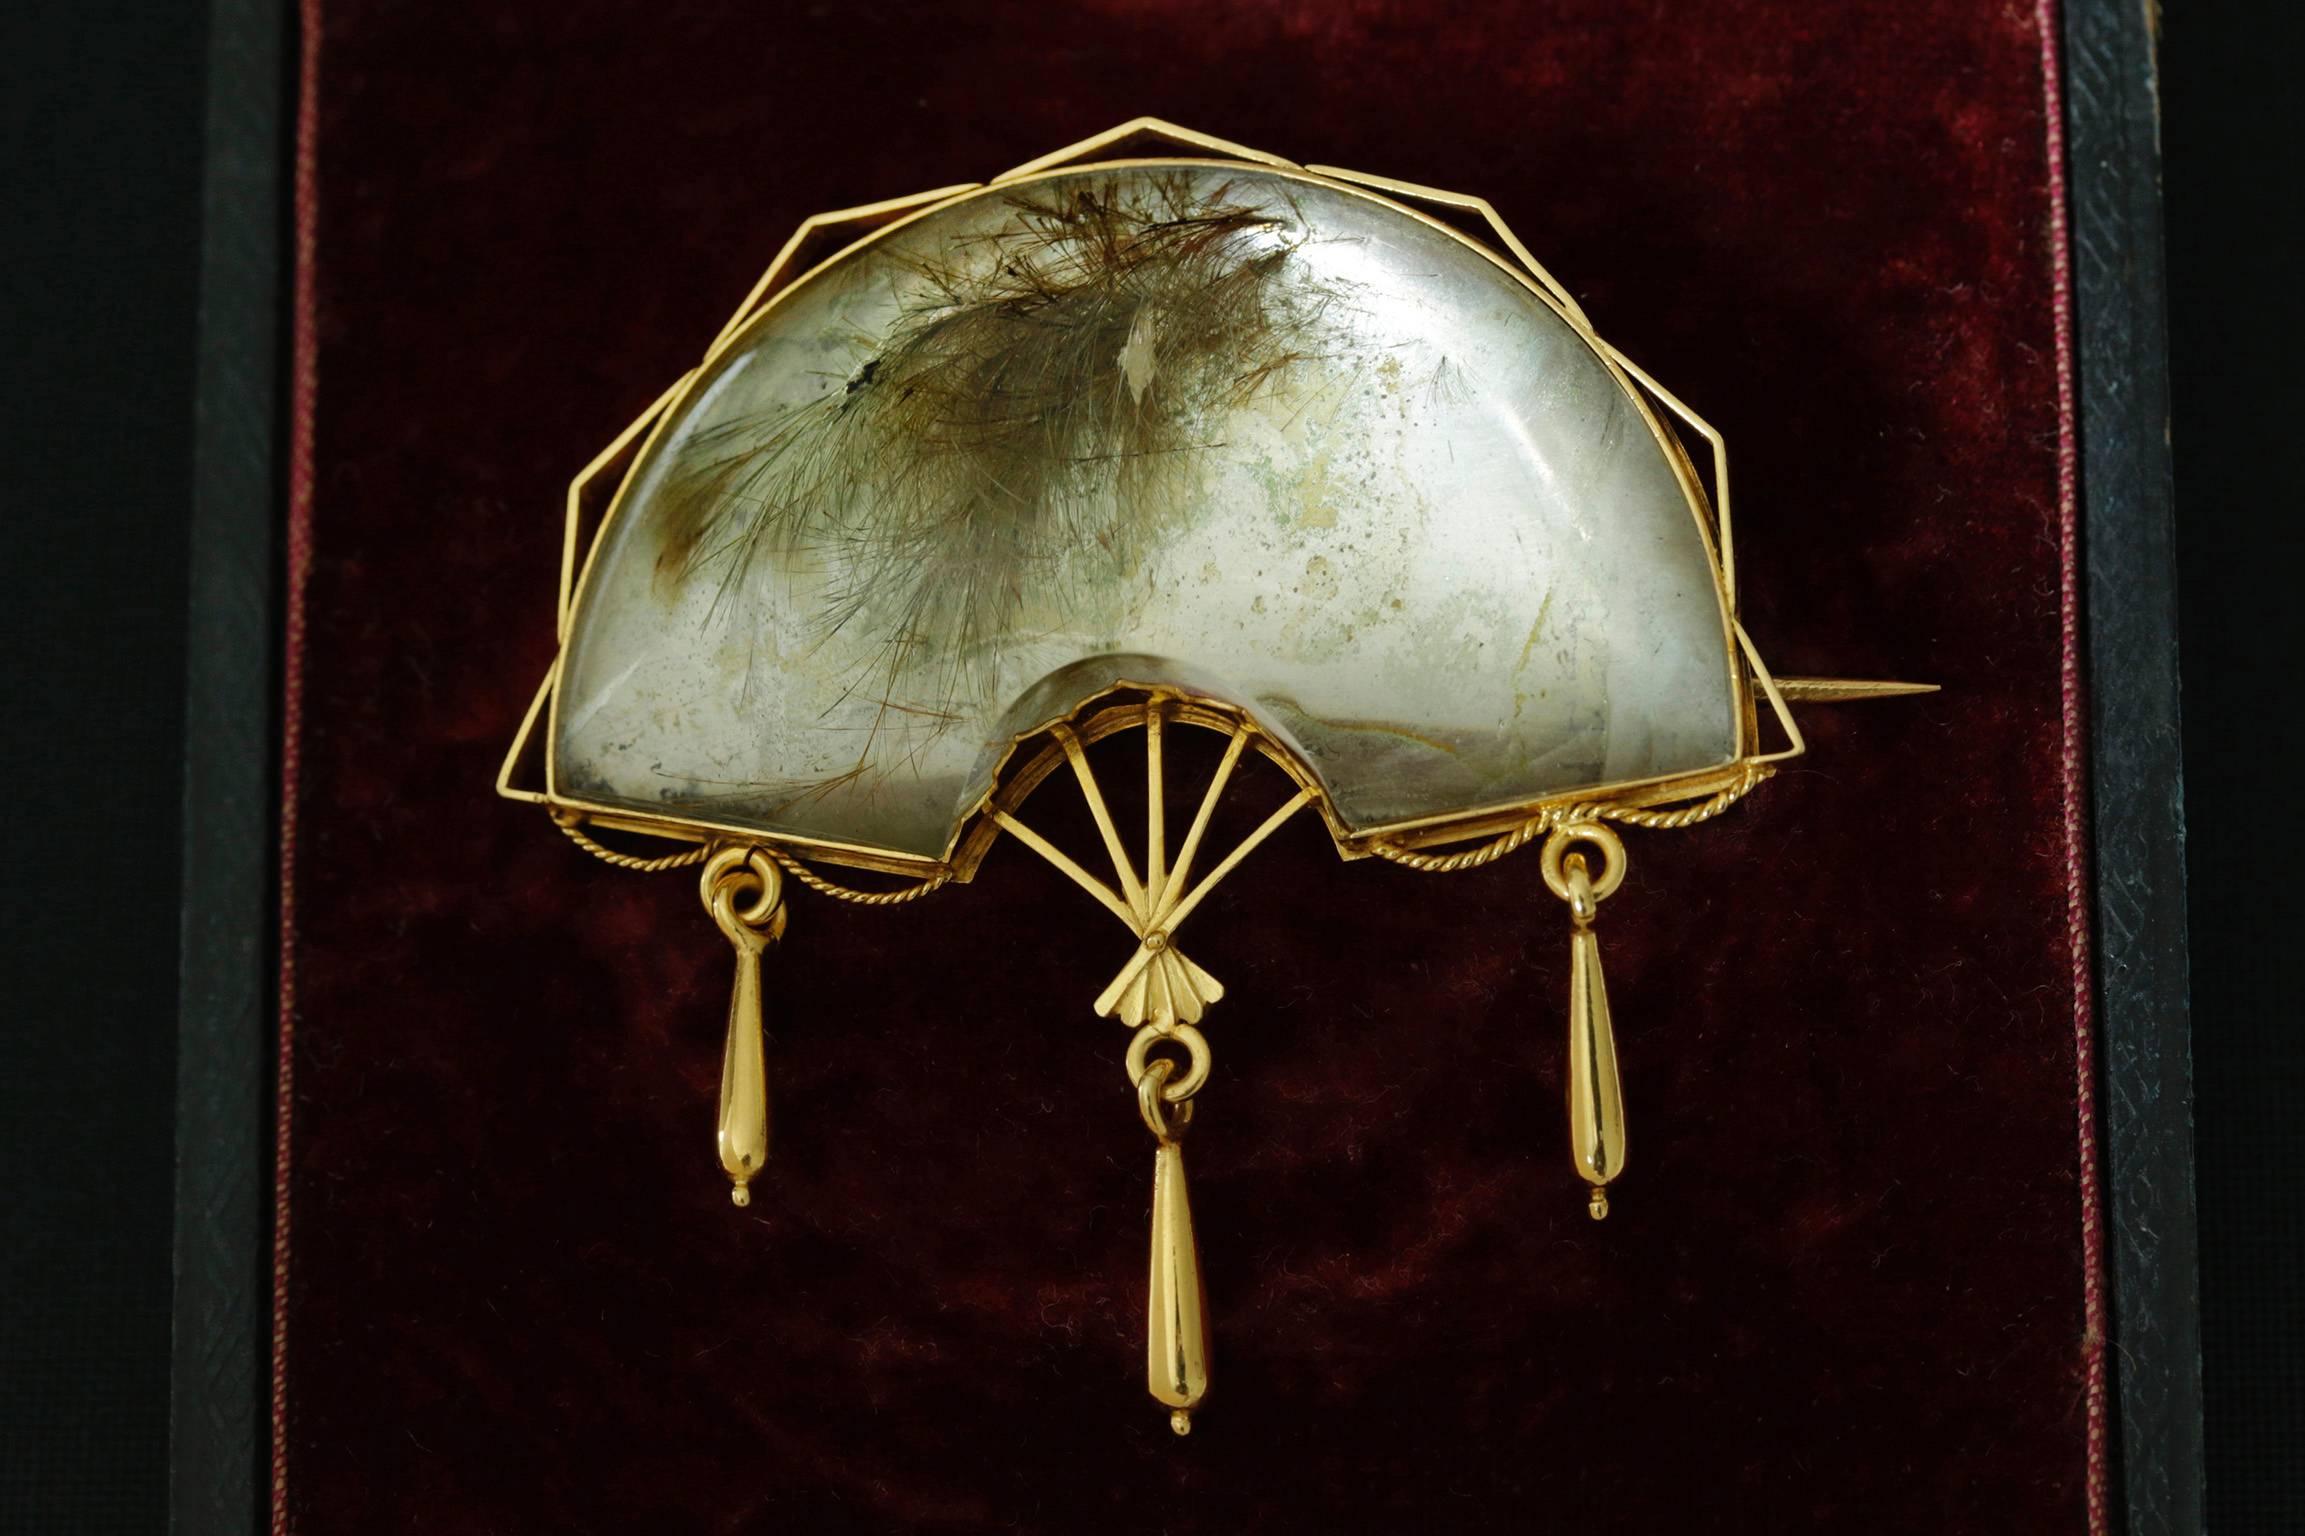 This is an amazing example of how the Victorians used the materials and shapes together. Rutilated quartz are often called 'hair crystal' because of its natural inclusions. This case, this the quartz has organically formed some feather-like